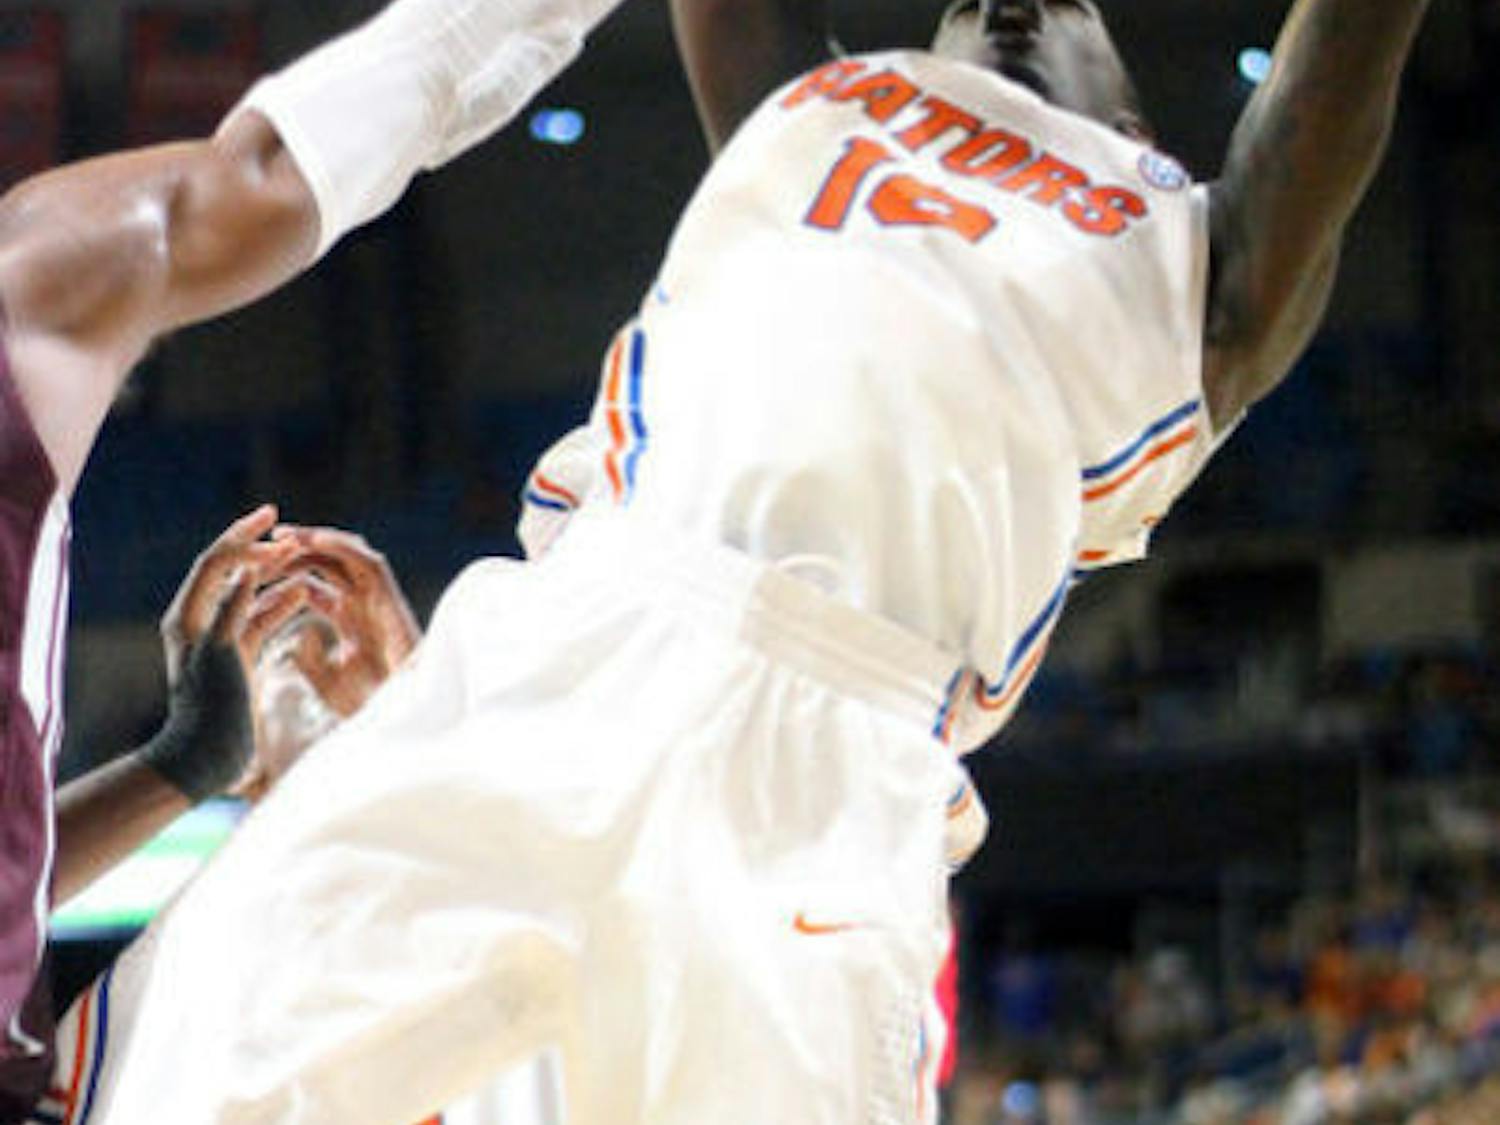 Dorian Finney-Smith attempts a shot during Florida’s 86-56 victory against Arkansas-Little Rock on Saturday in the O’Connell Center.